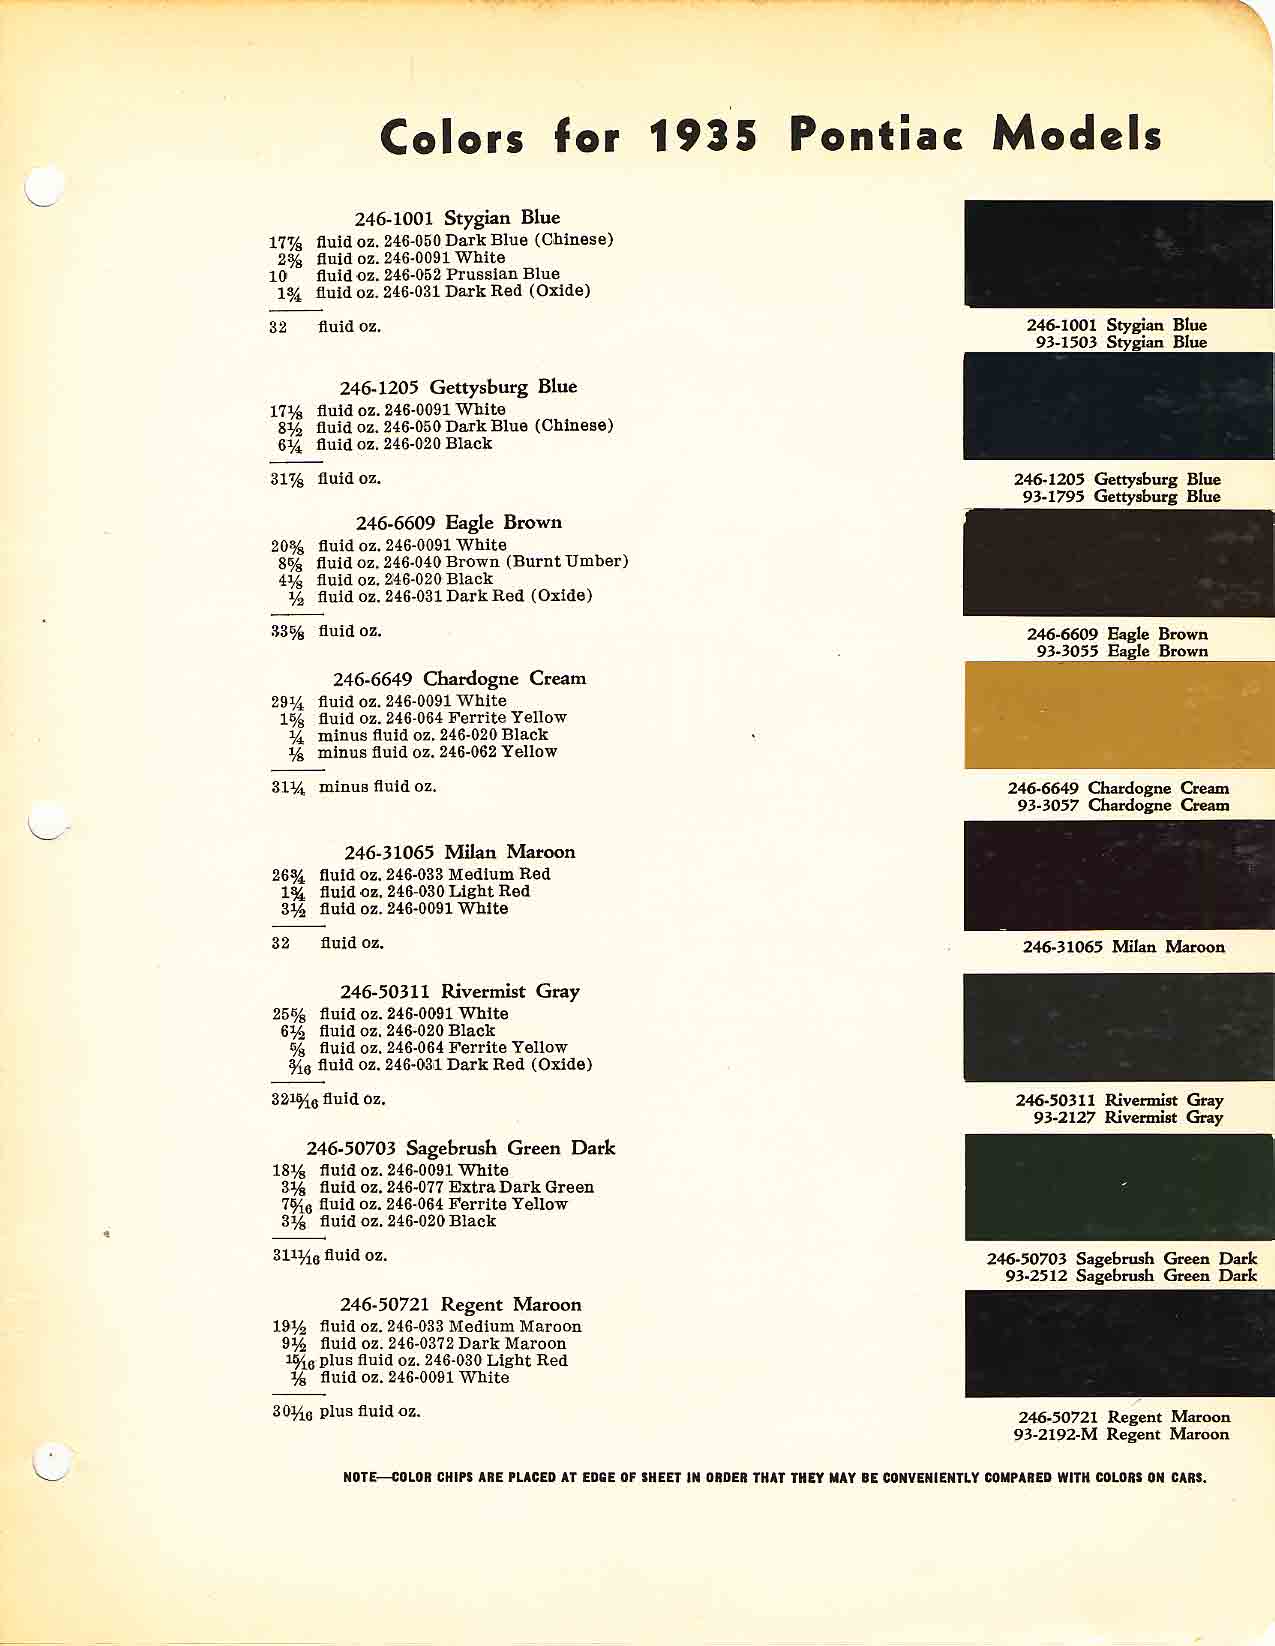 Colors and codes used on Pontiac Vehicles in 1935